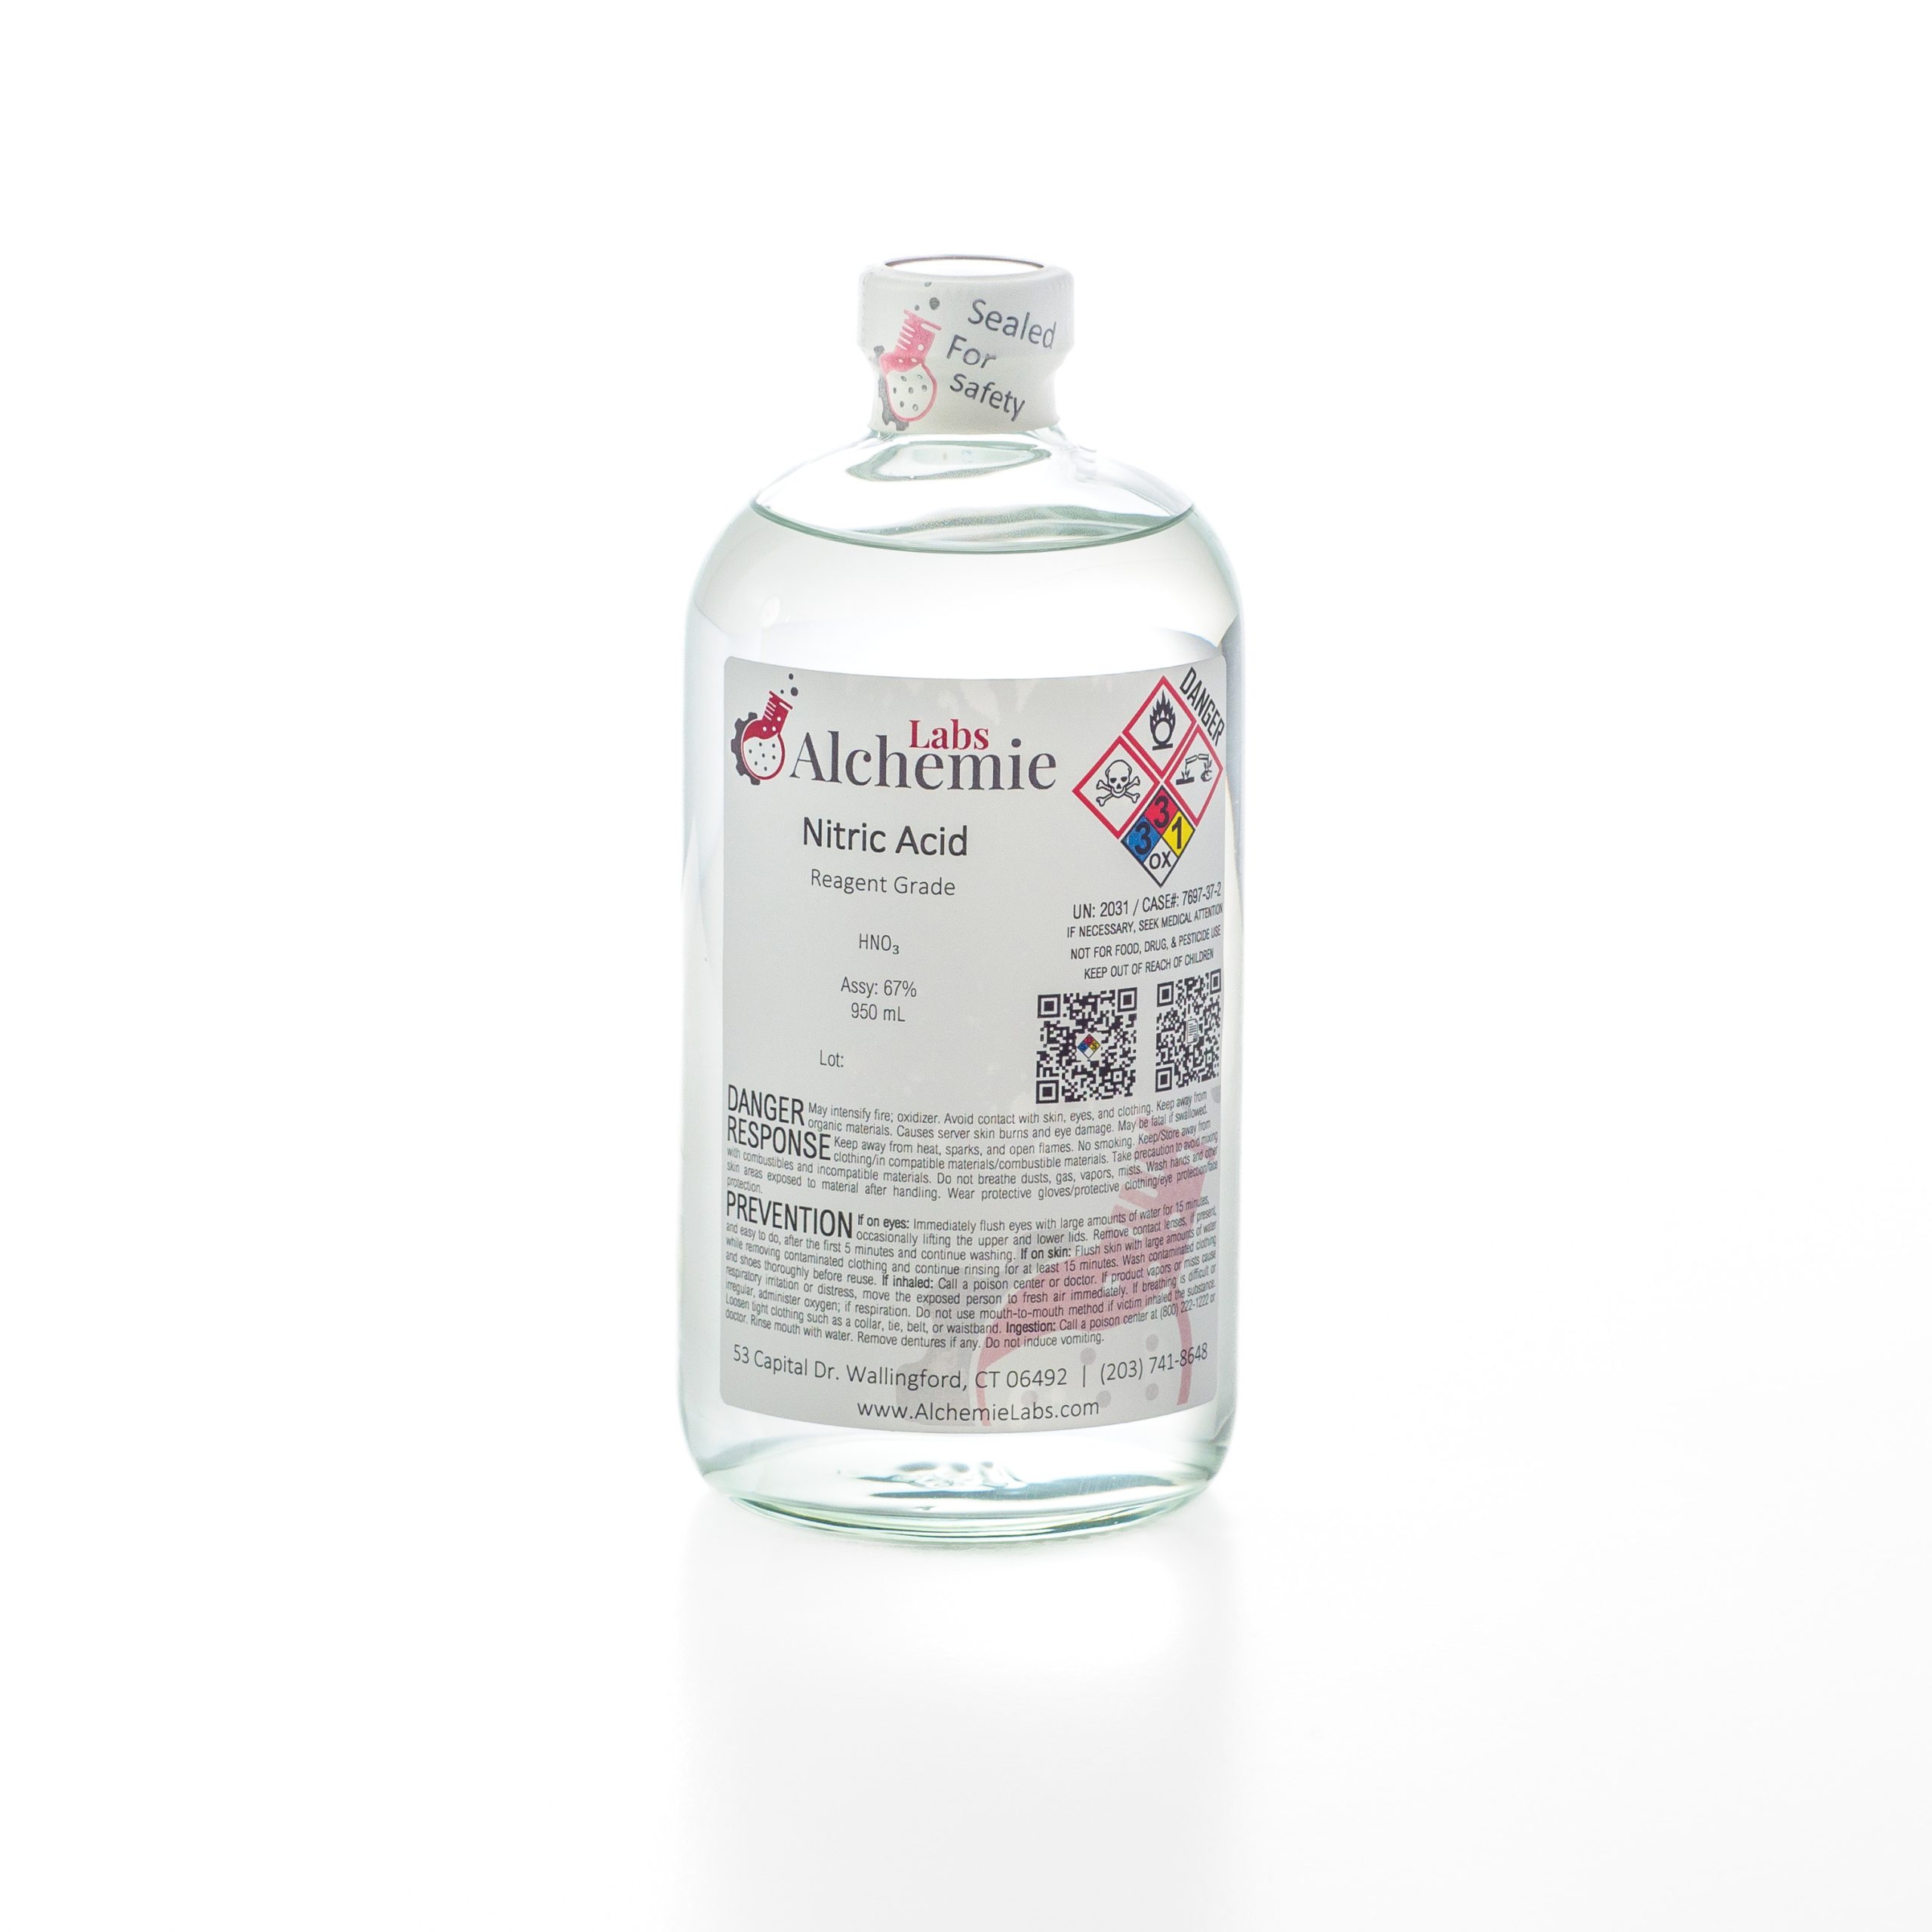 950mL clear glass bottle of Alchemie Labs nitric acid, with reagent grade purity and safety seal intact.